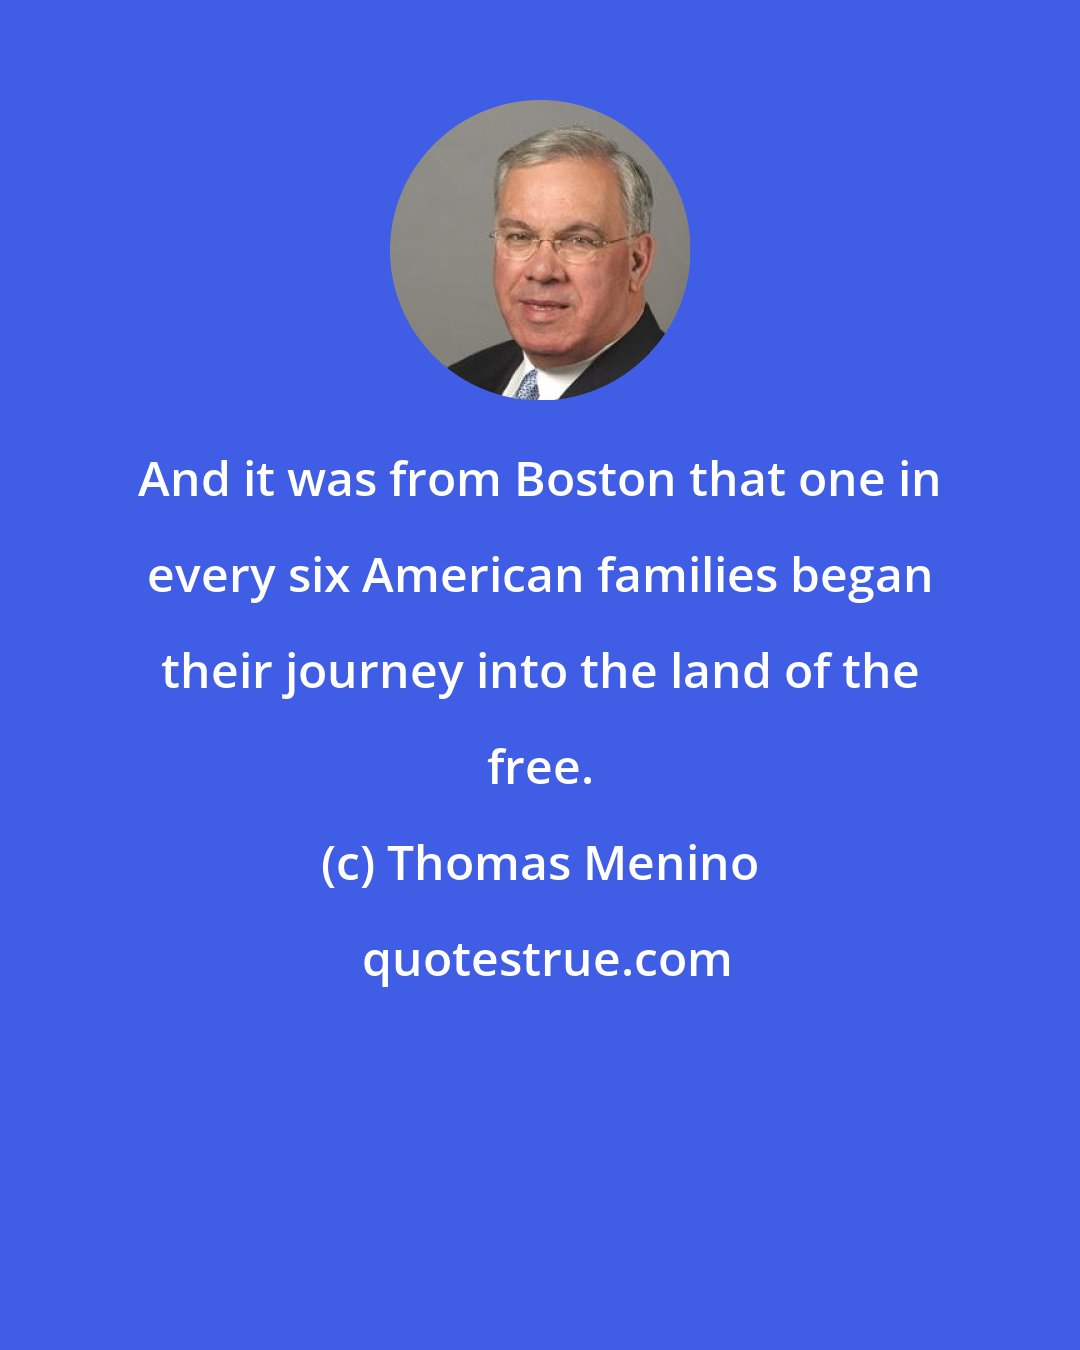 Thomas Menino: And it was from Boston that one in every six American families began their journey into the land of the free.